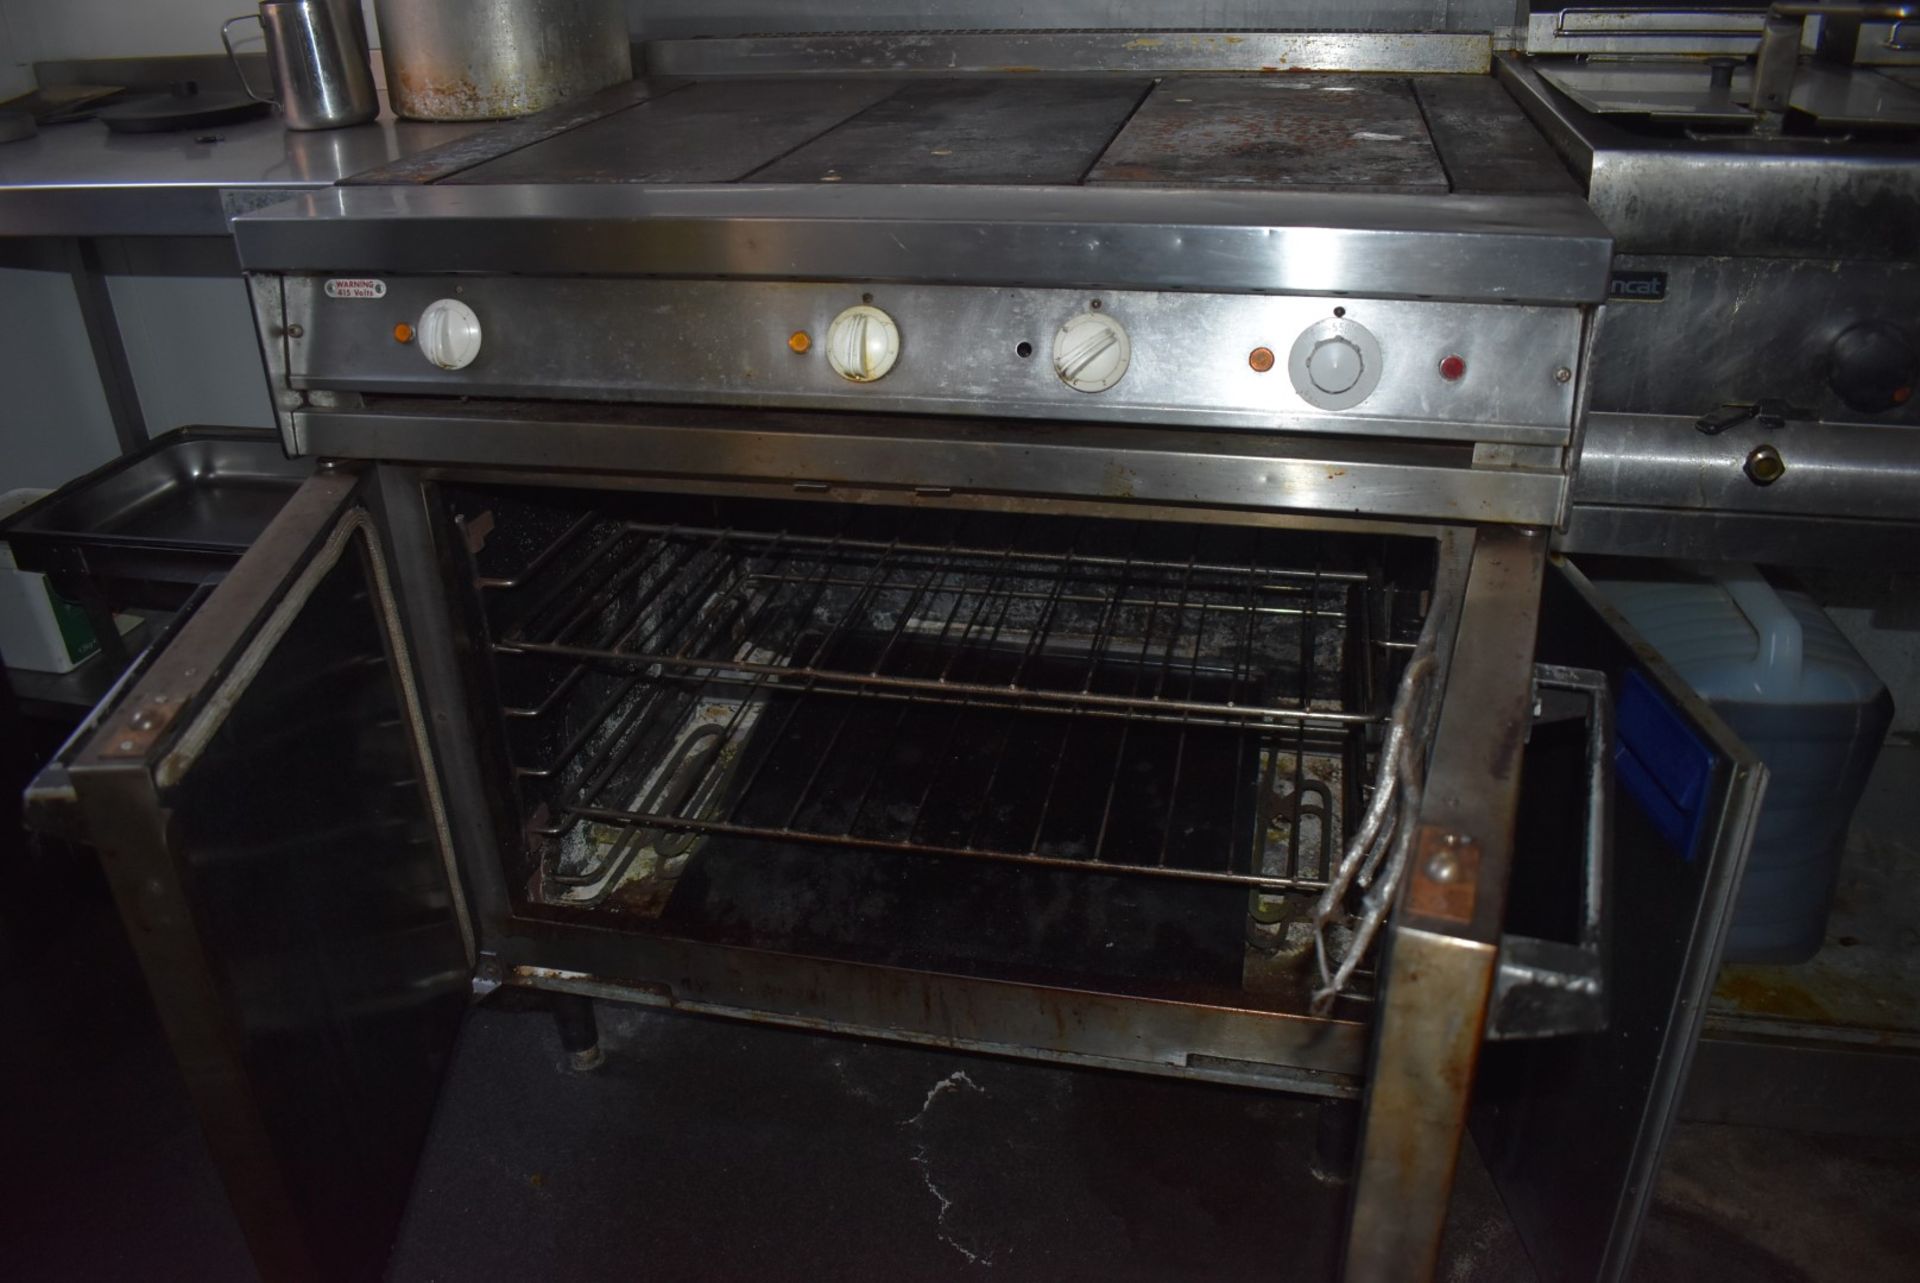 1 x Solid Top Commercial Range Cooker Oven - 90cm Wide - 3 Phase Power - CL586 - Image 3 of 3